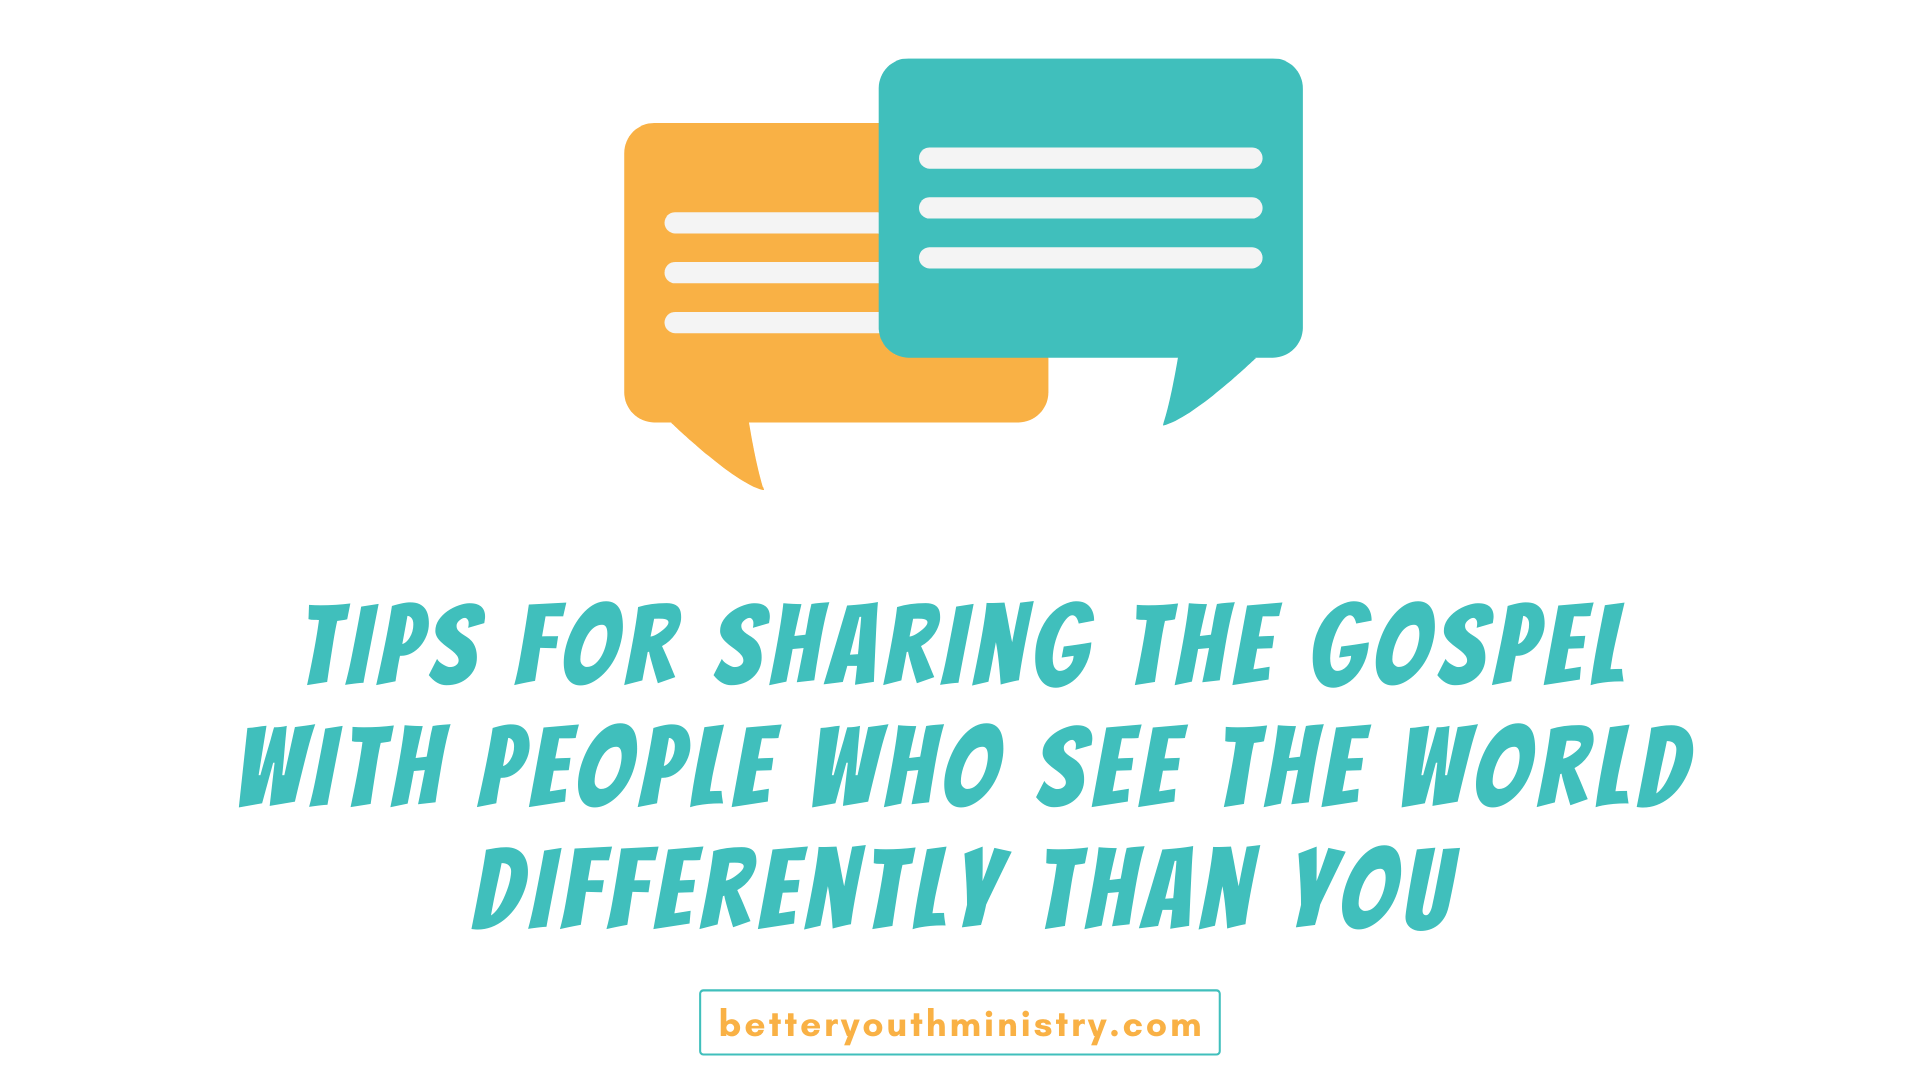 Tips for sharing the gospel with people who see the world differently than you